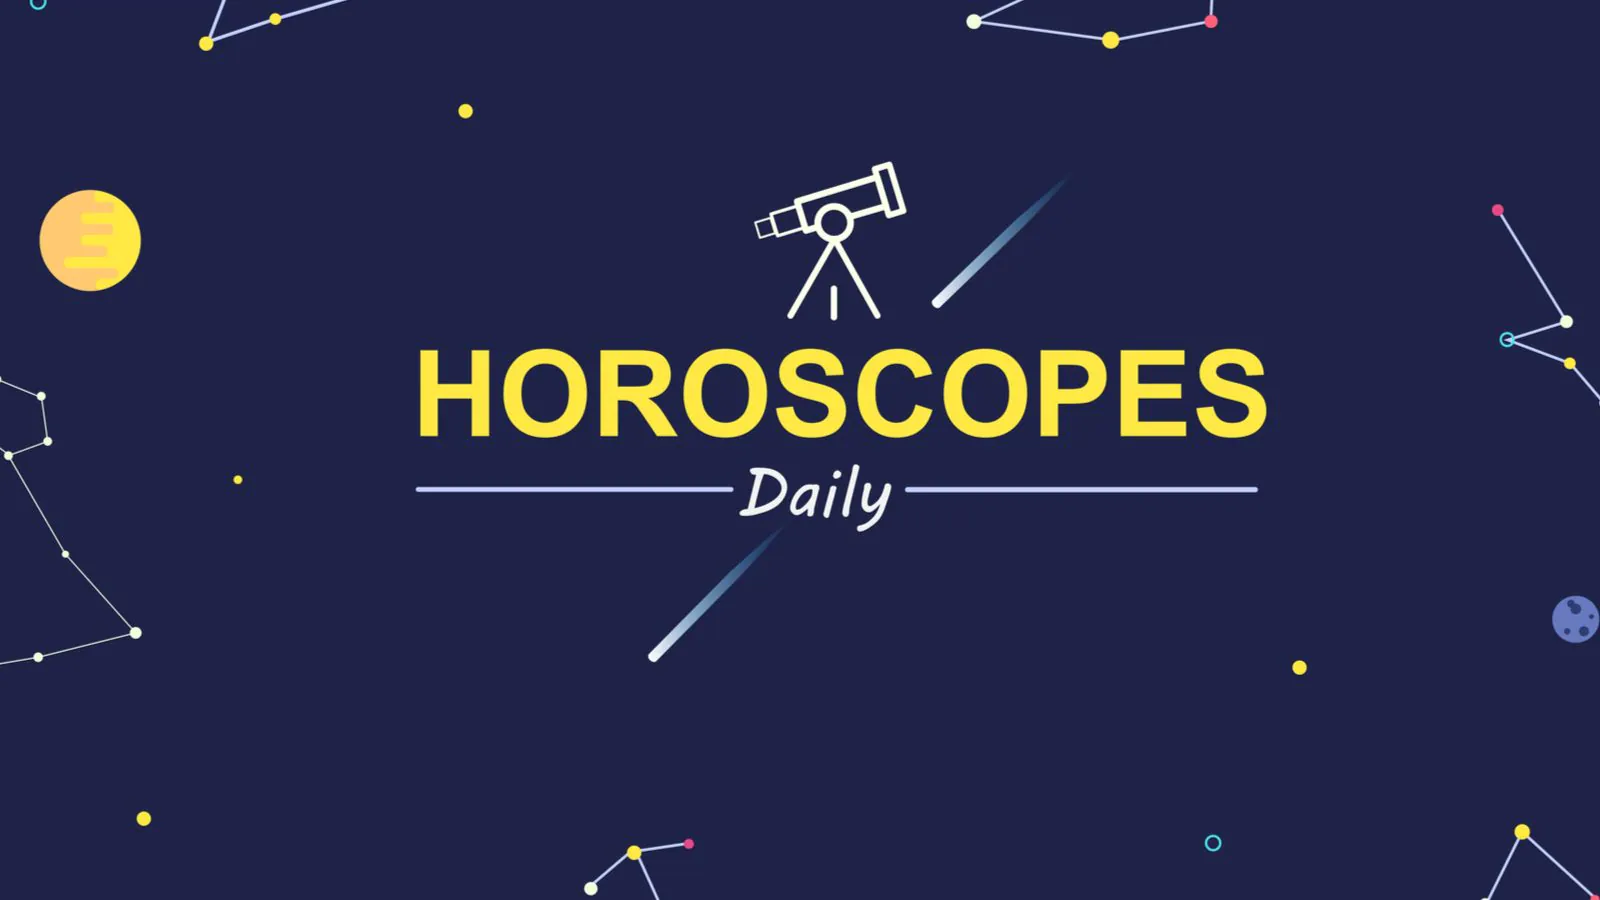 Check Out Daily Astrological Prediction for Aries, Taurus, Libra, Sagittarius And Other Zodiac Signs for Sunday